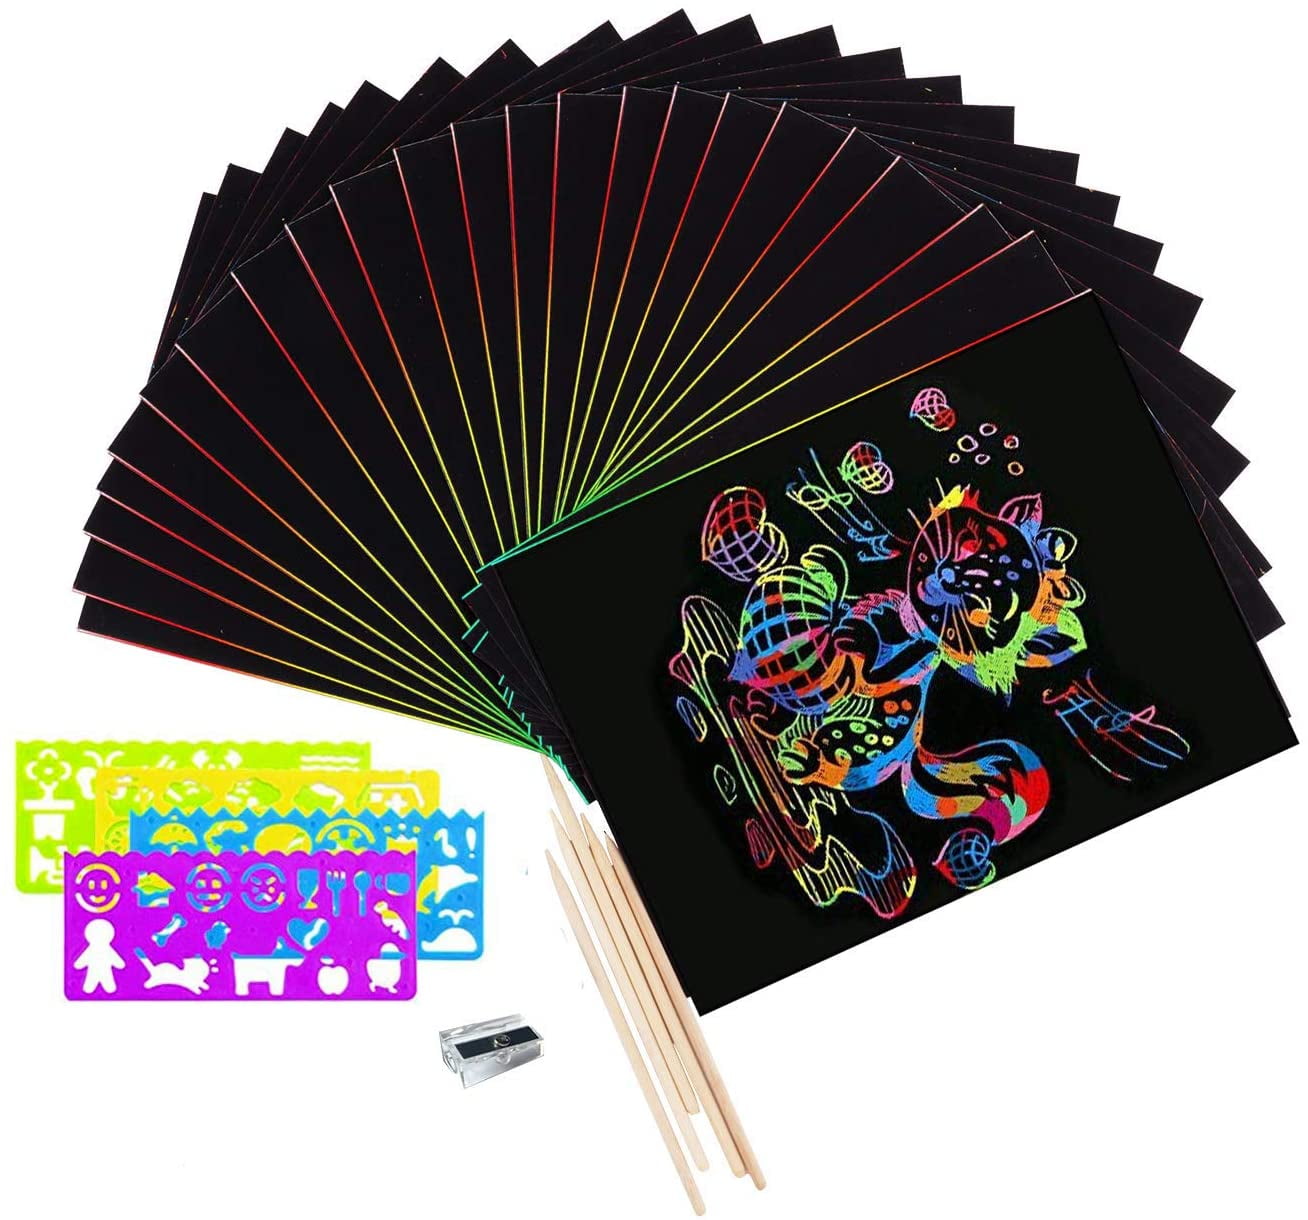 Face Like 20 Sheets Scratch Art Paper Black Magic Rainbow Painting Boards with 1 